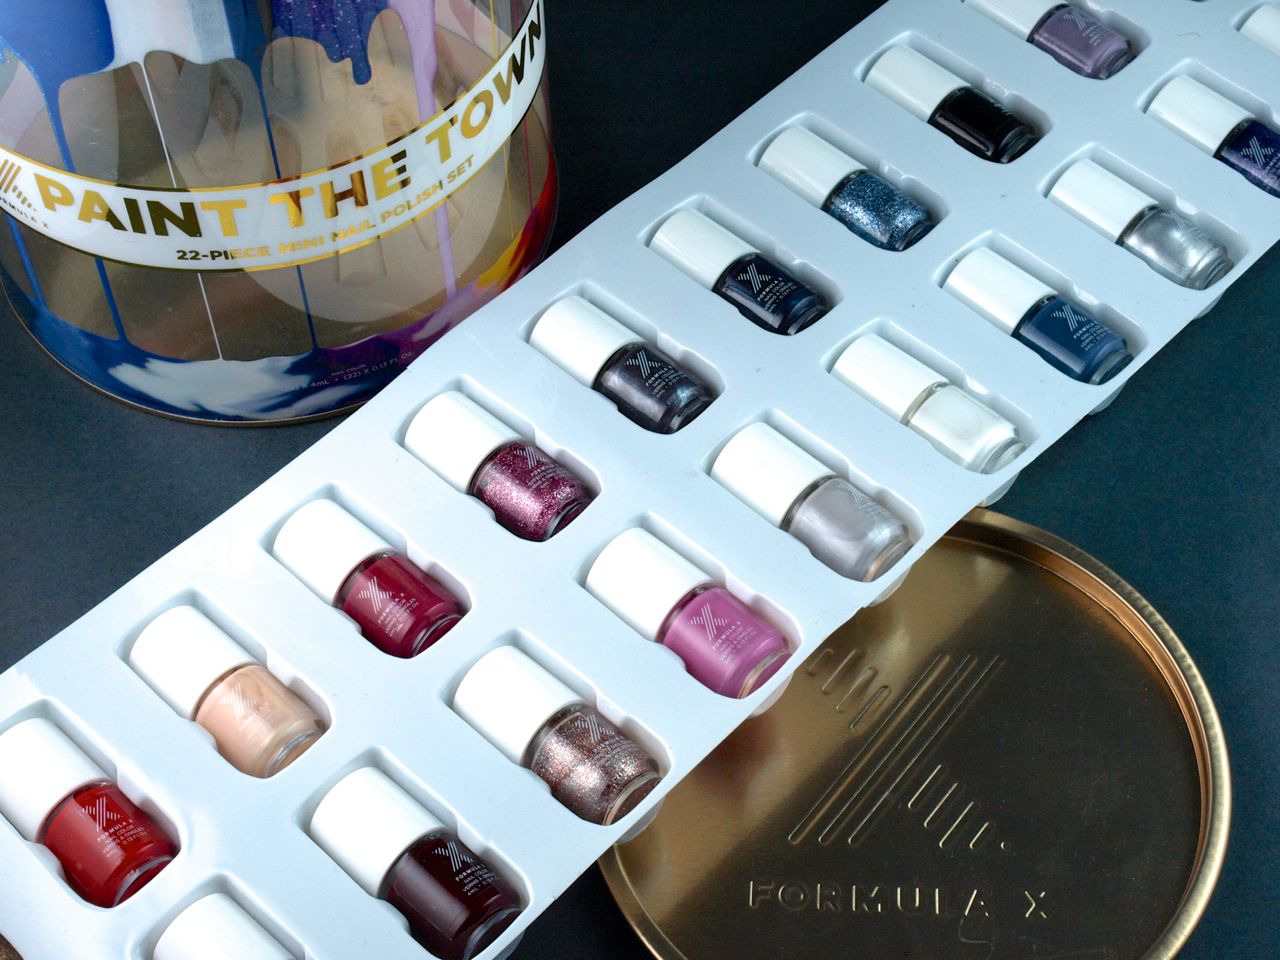 Formula X Paint The Town 22-Piece Mini Nail Polish Set: Review and Swatches